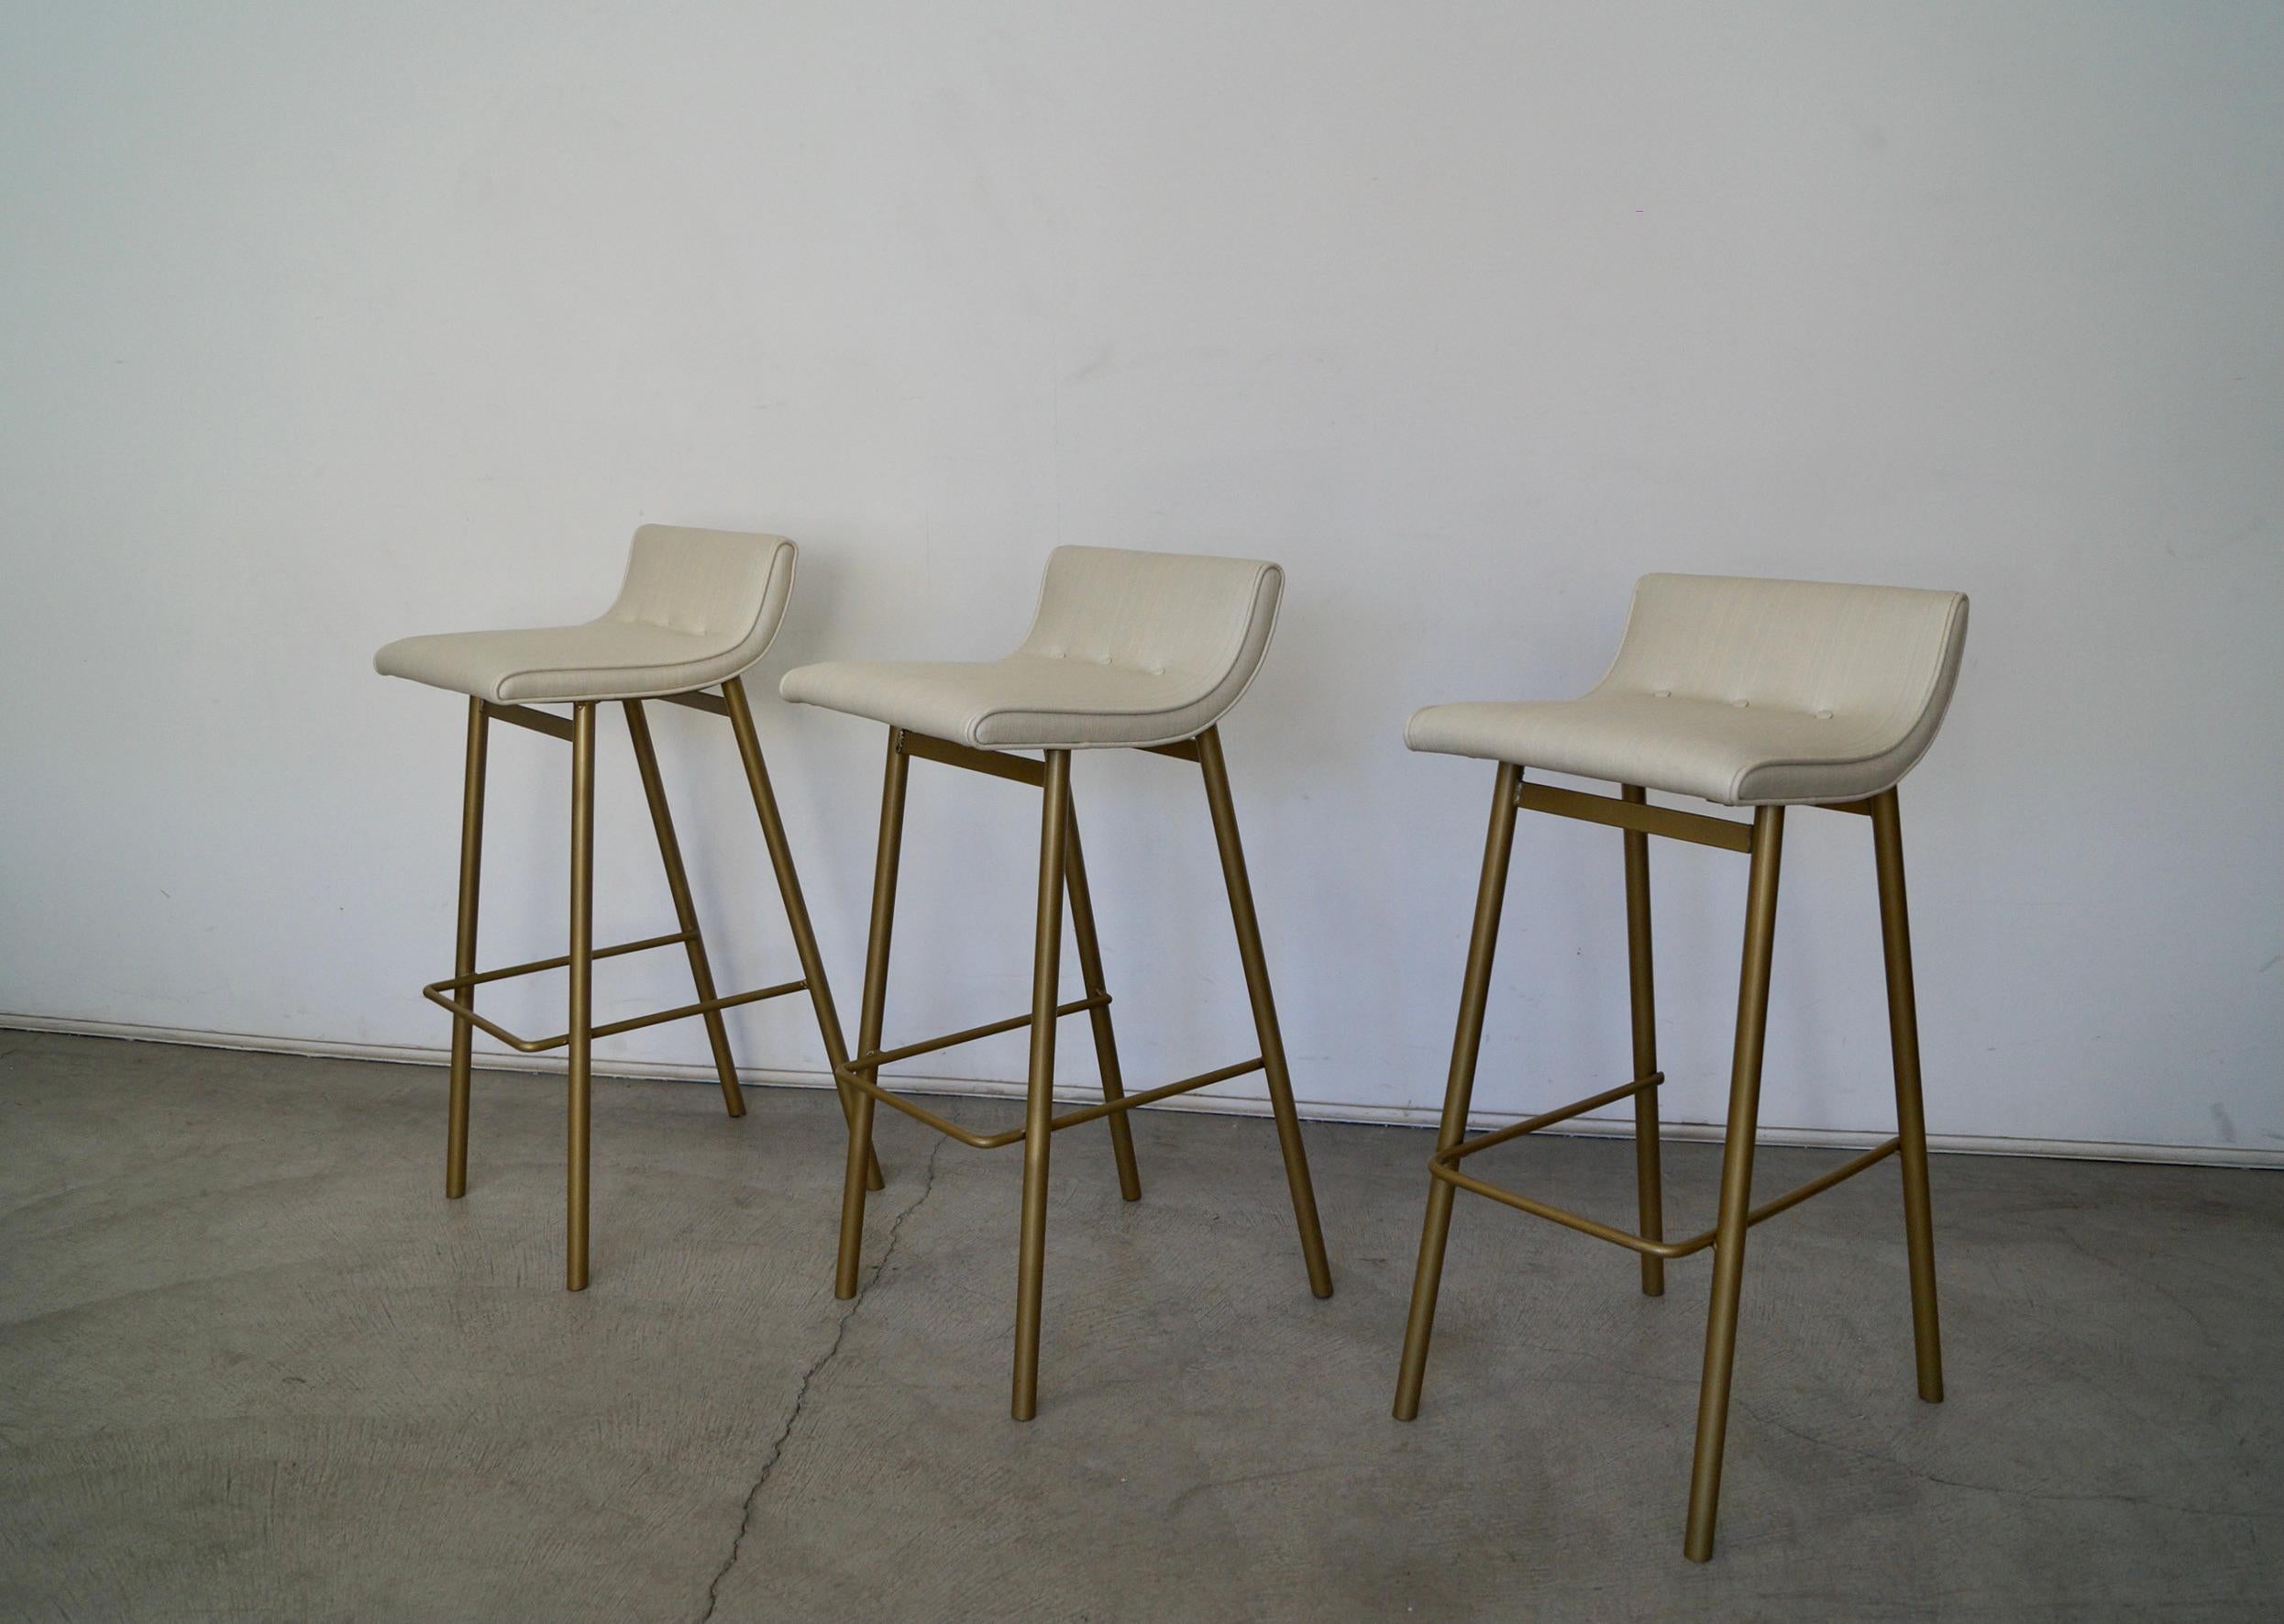 Vintage 1950's Mid-century Modern barstools for sale. The metal bases were previously professionally sandblasted and powder coated in a metallic gold brass, and have been reupholstered in a vinyl by Knoll. They were manufactured by Vista of